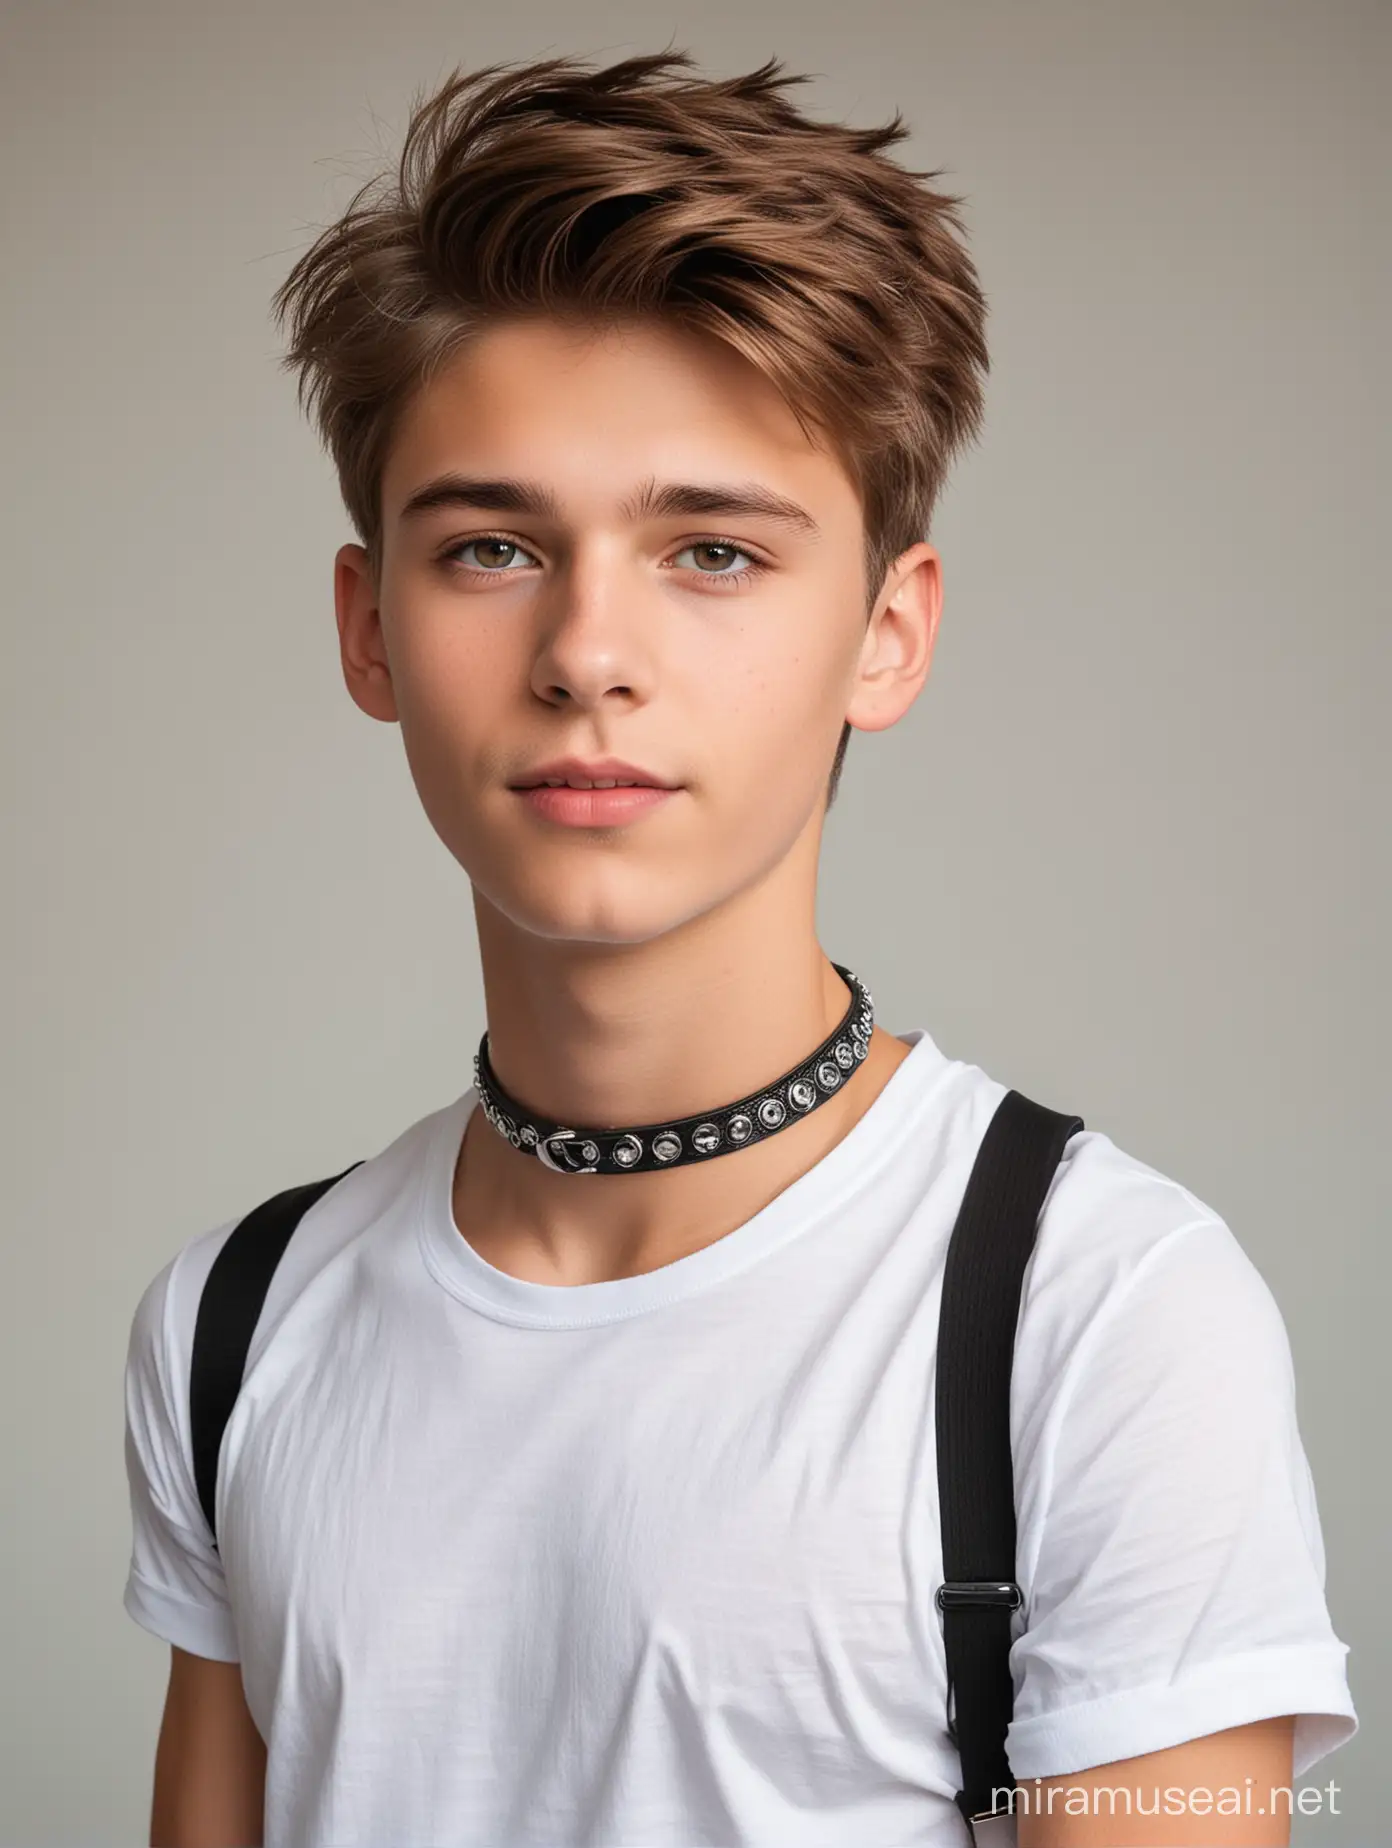 A beautiful young twink with a dog collar around his neck, wearing a white t-shirt